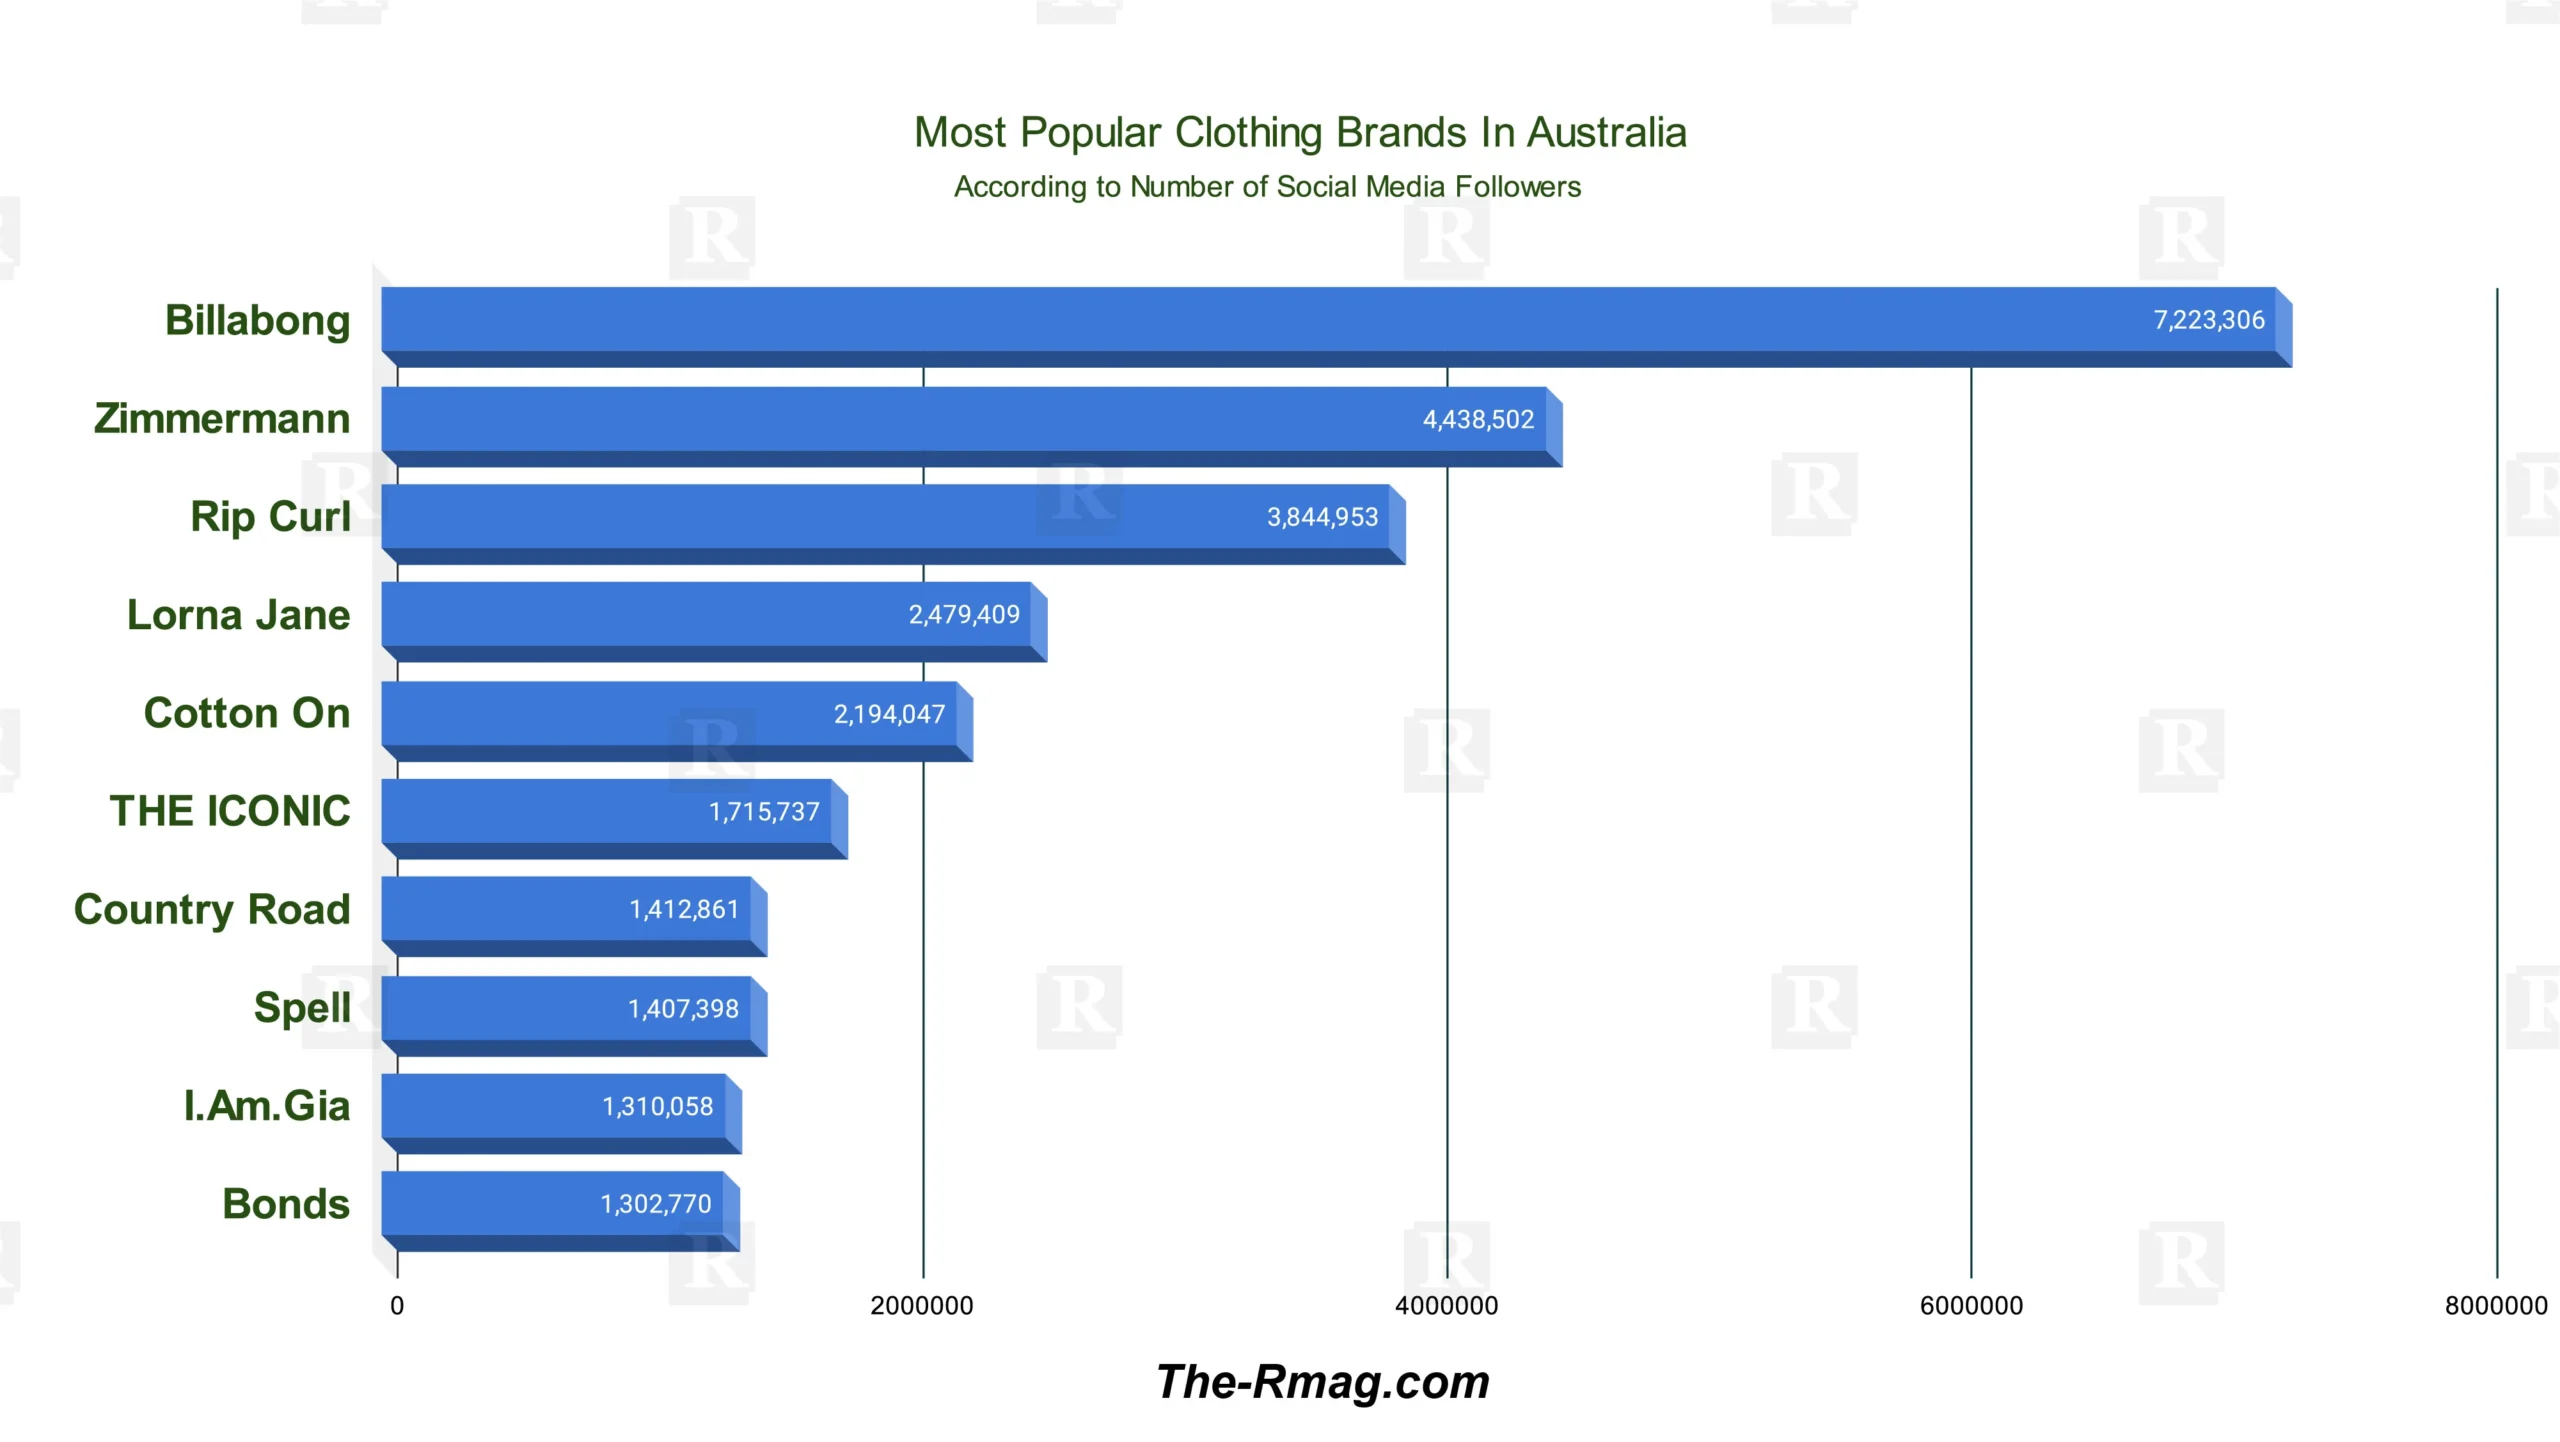 Most Popular Clothing Brands in Australia